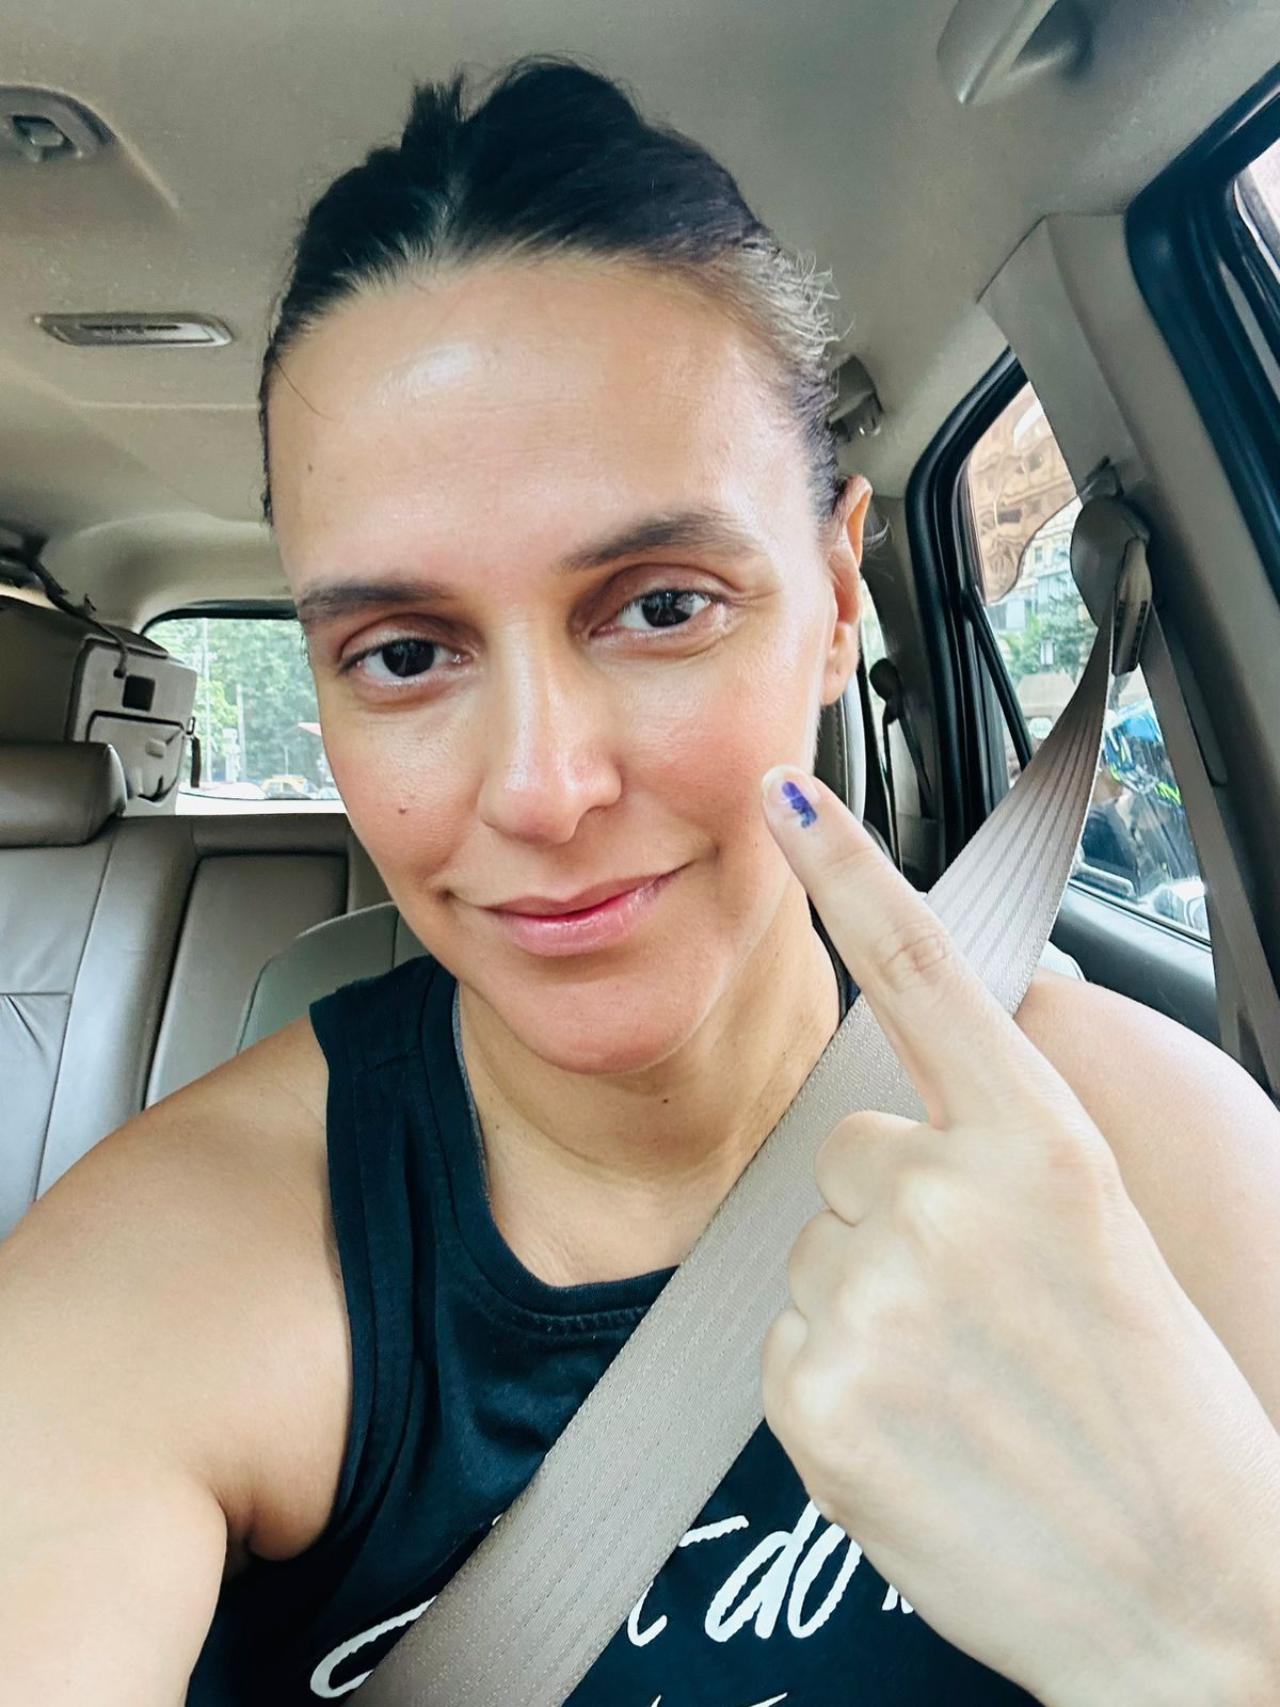 Neha Dhupia flaunts her inked finger on Monday morning after casting her vote in Mumbai